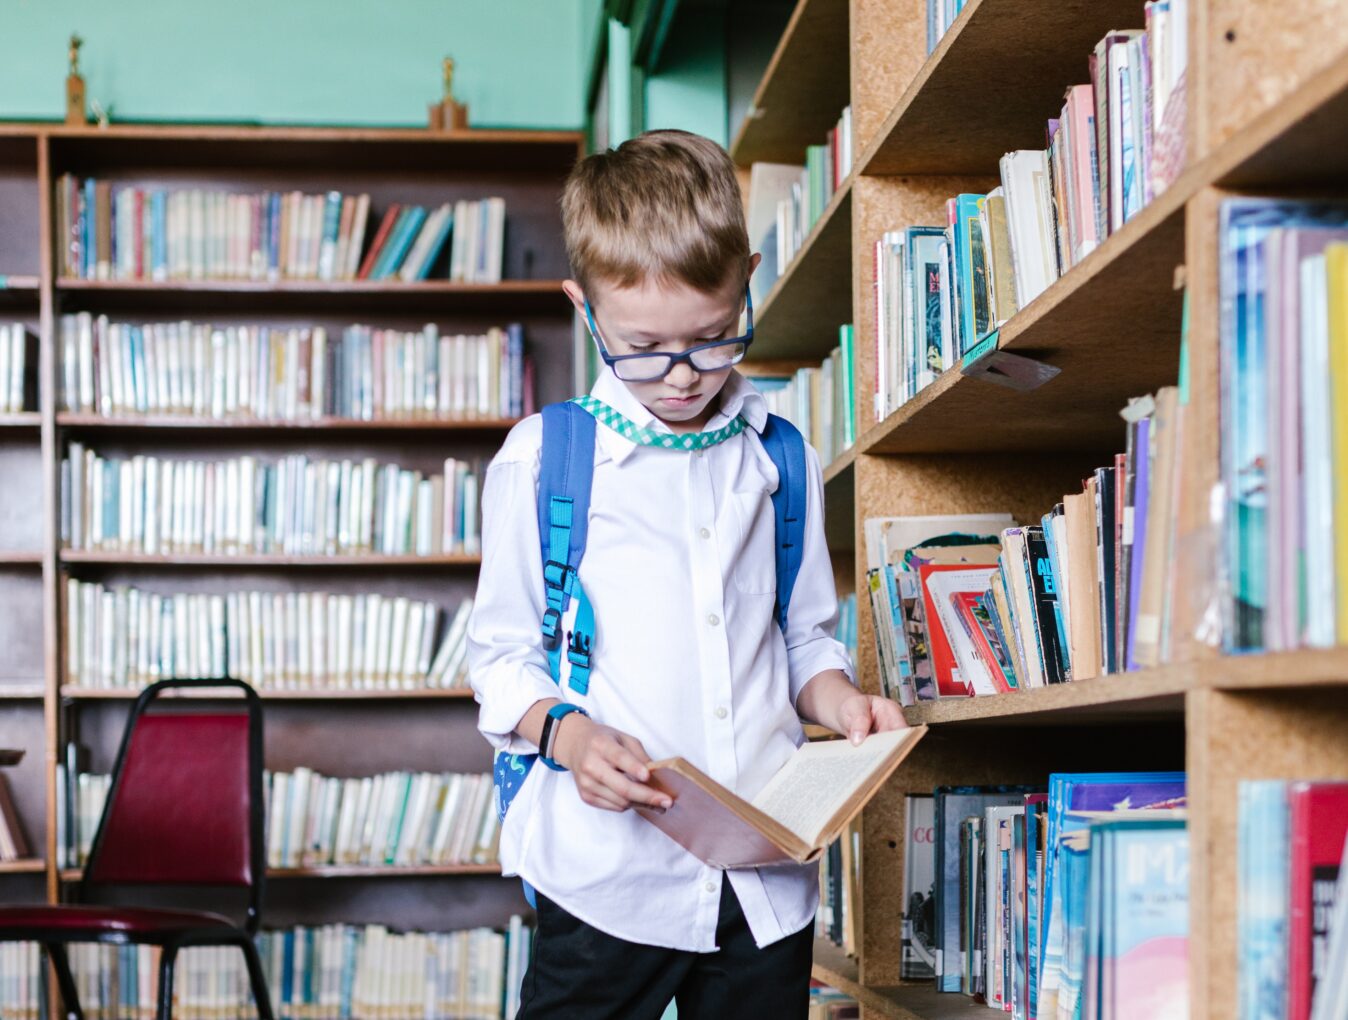 A school child is engrossed in a book in a school library.